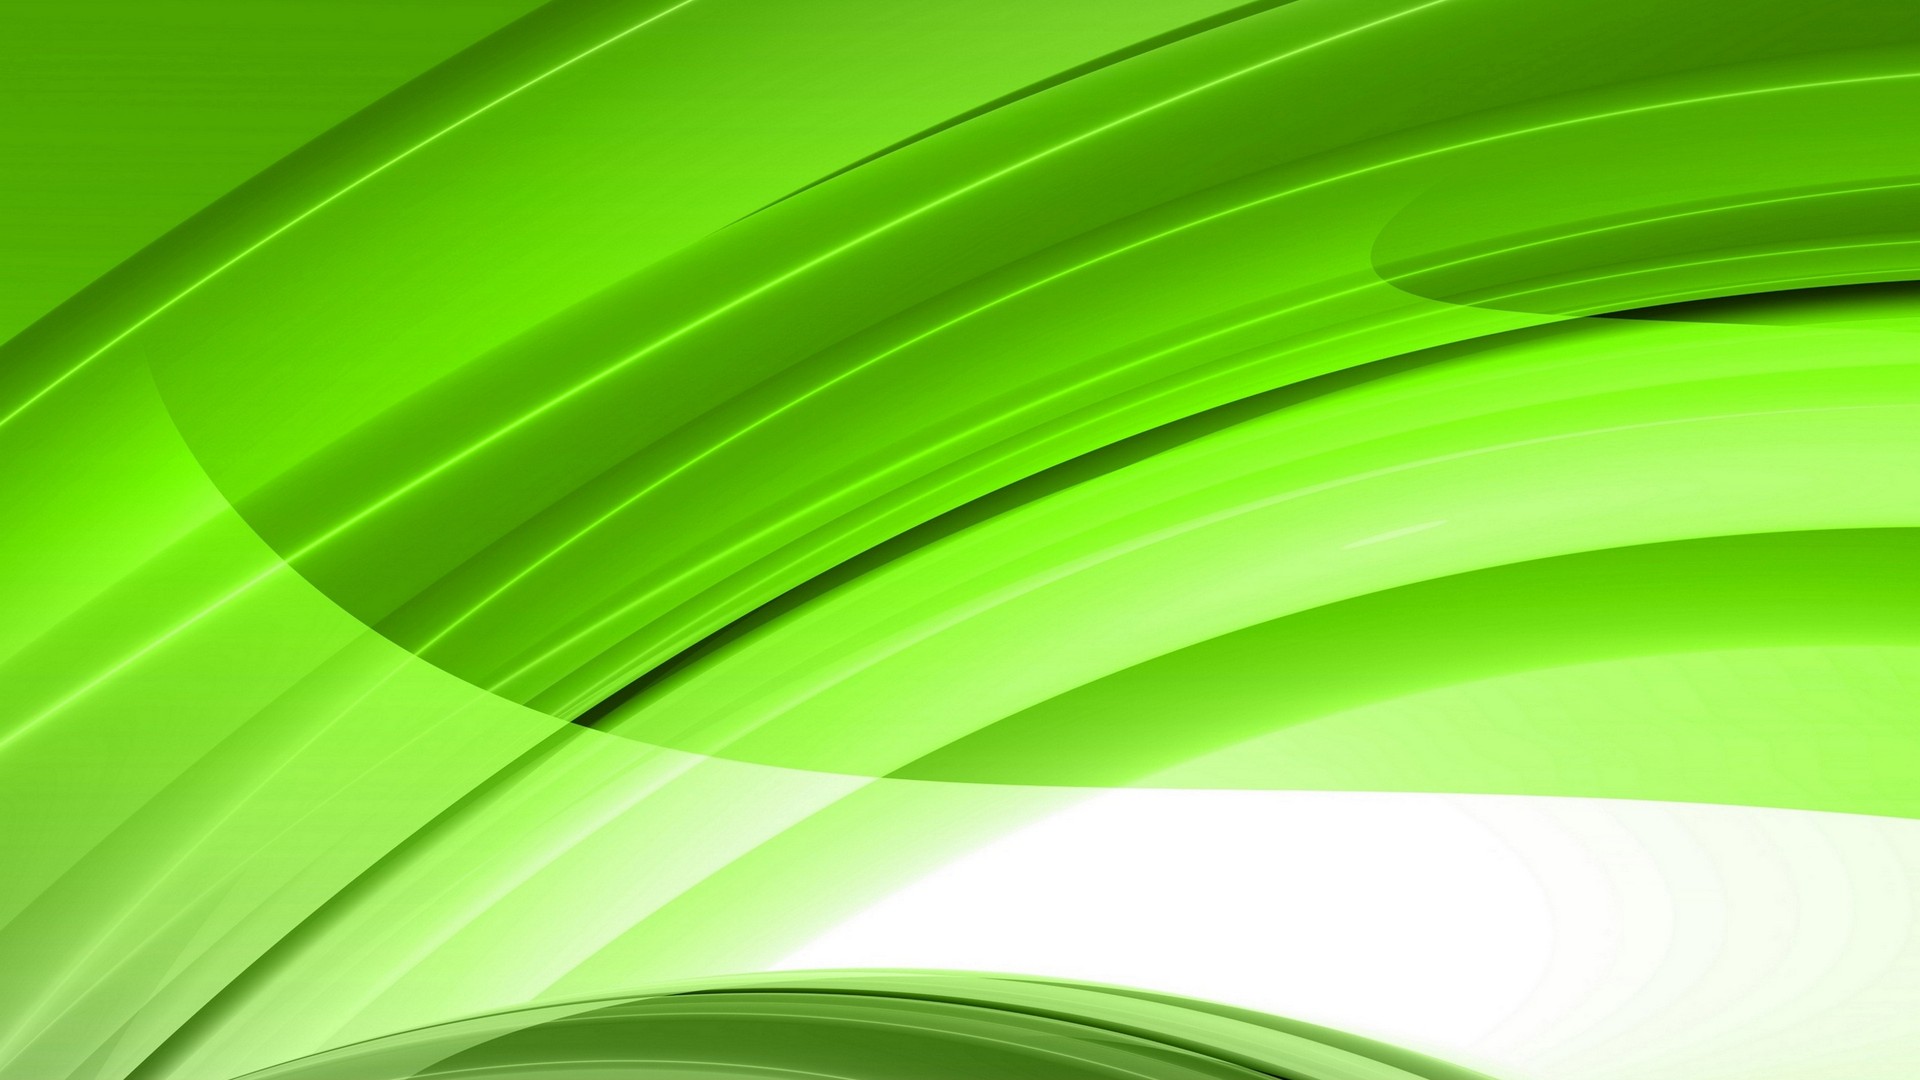 Light Green Desktop Backgrounds With Resolution 1920X1080 pixel. You can make this wallpaper for your Desktop Computer Backgrounds, Mac Wallpapers, Android Lock screen or iPhone Screensavers